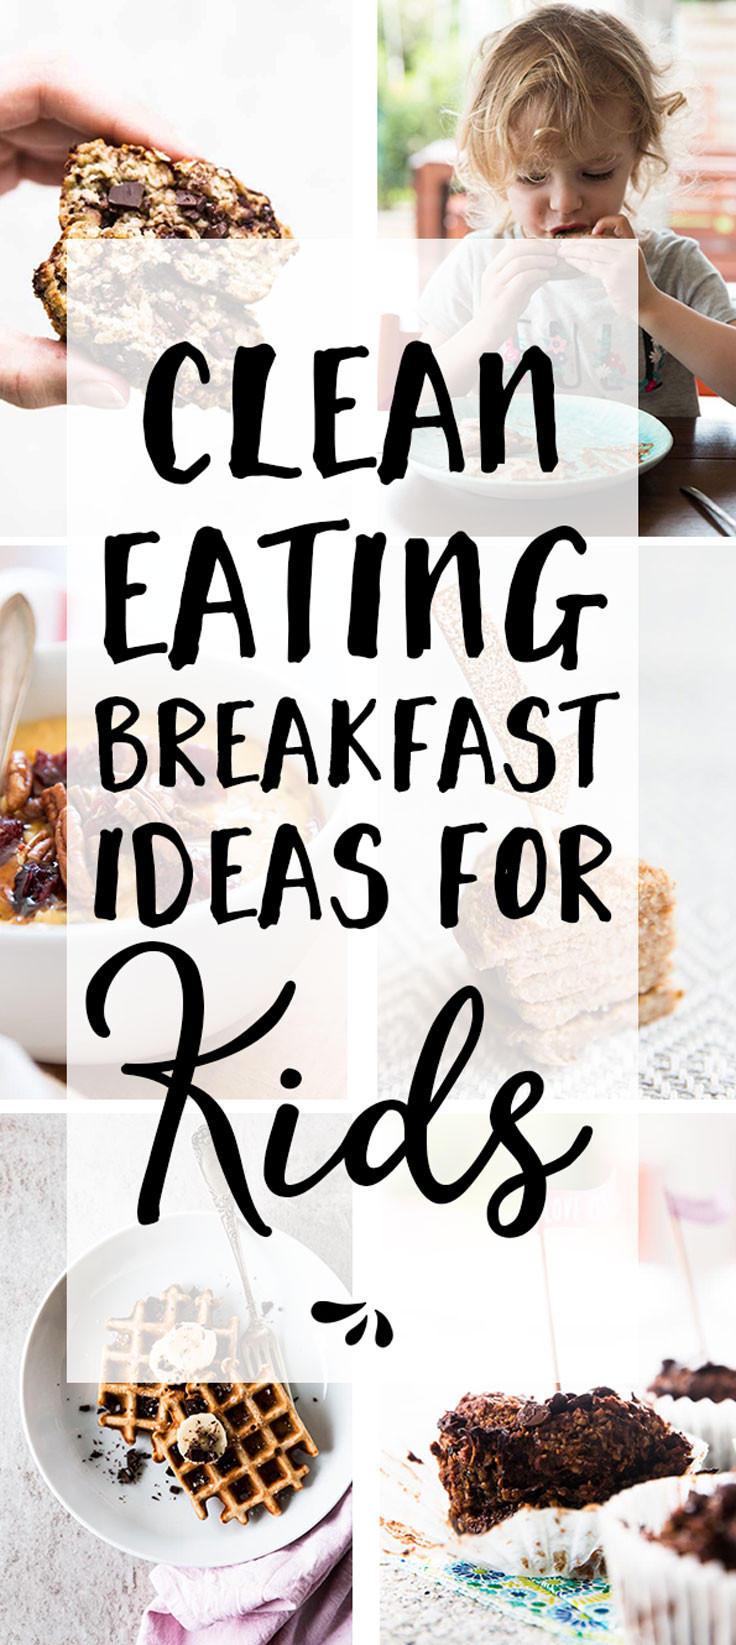 Clean Eating For Kids
 Easy Clean Eating Breakfast Ideas for Kids and Adults too